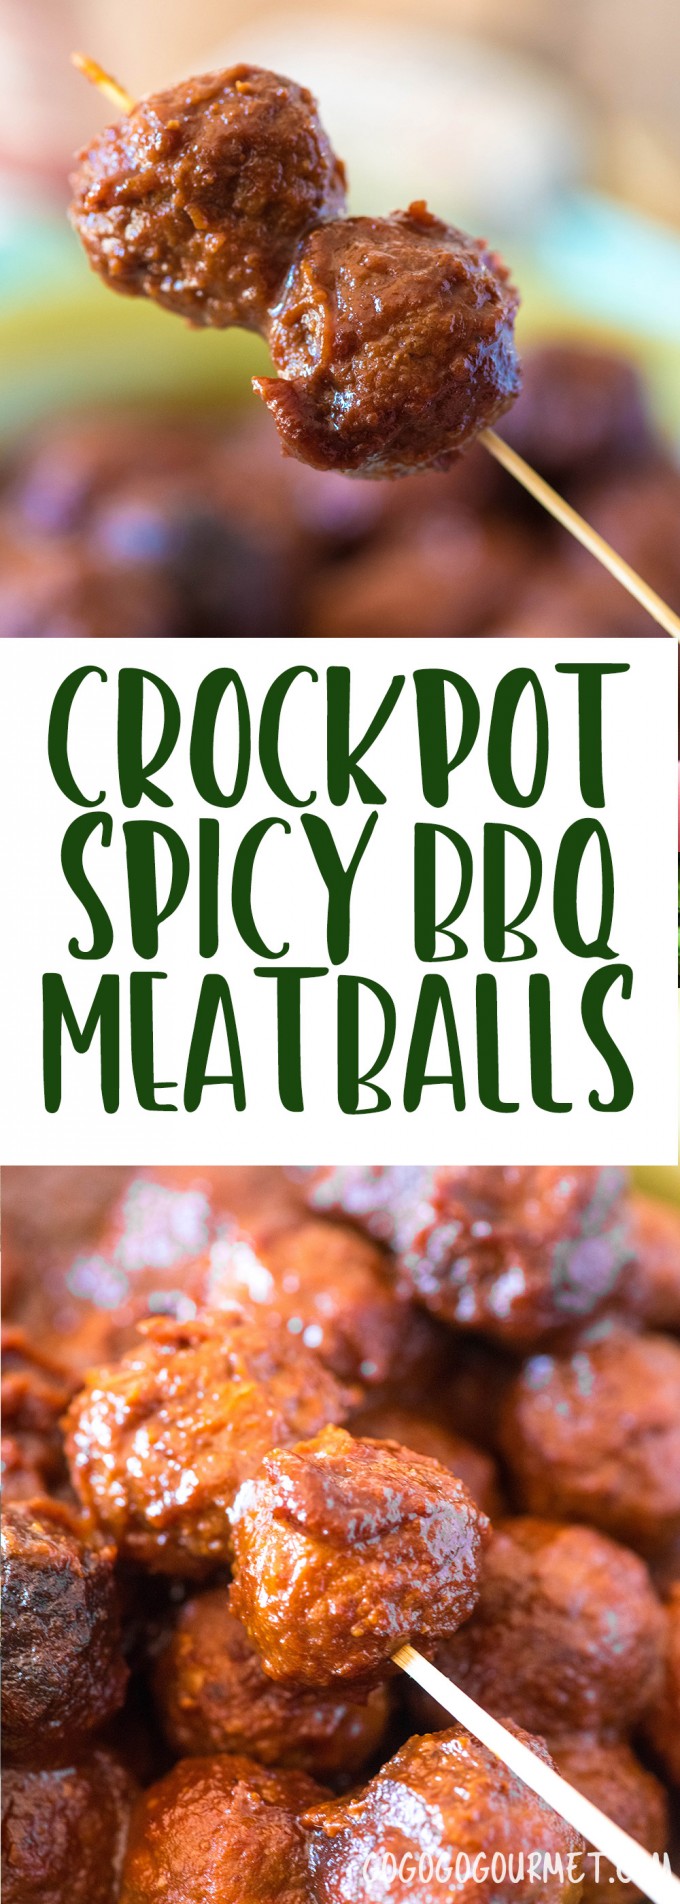 These Crockpot Spicy BBQ Meatballs are WAY better than the grape jelly ones! Make your own BBQ Sauce right in the slow cooker; these are perfect for game day! via @gogogogourmet